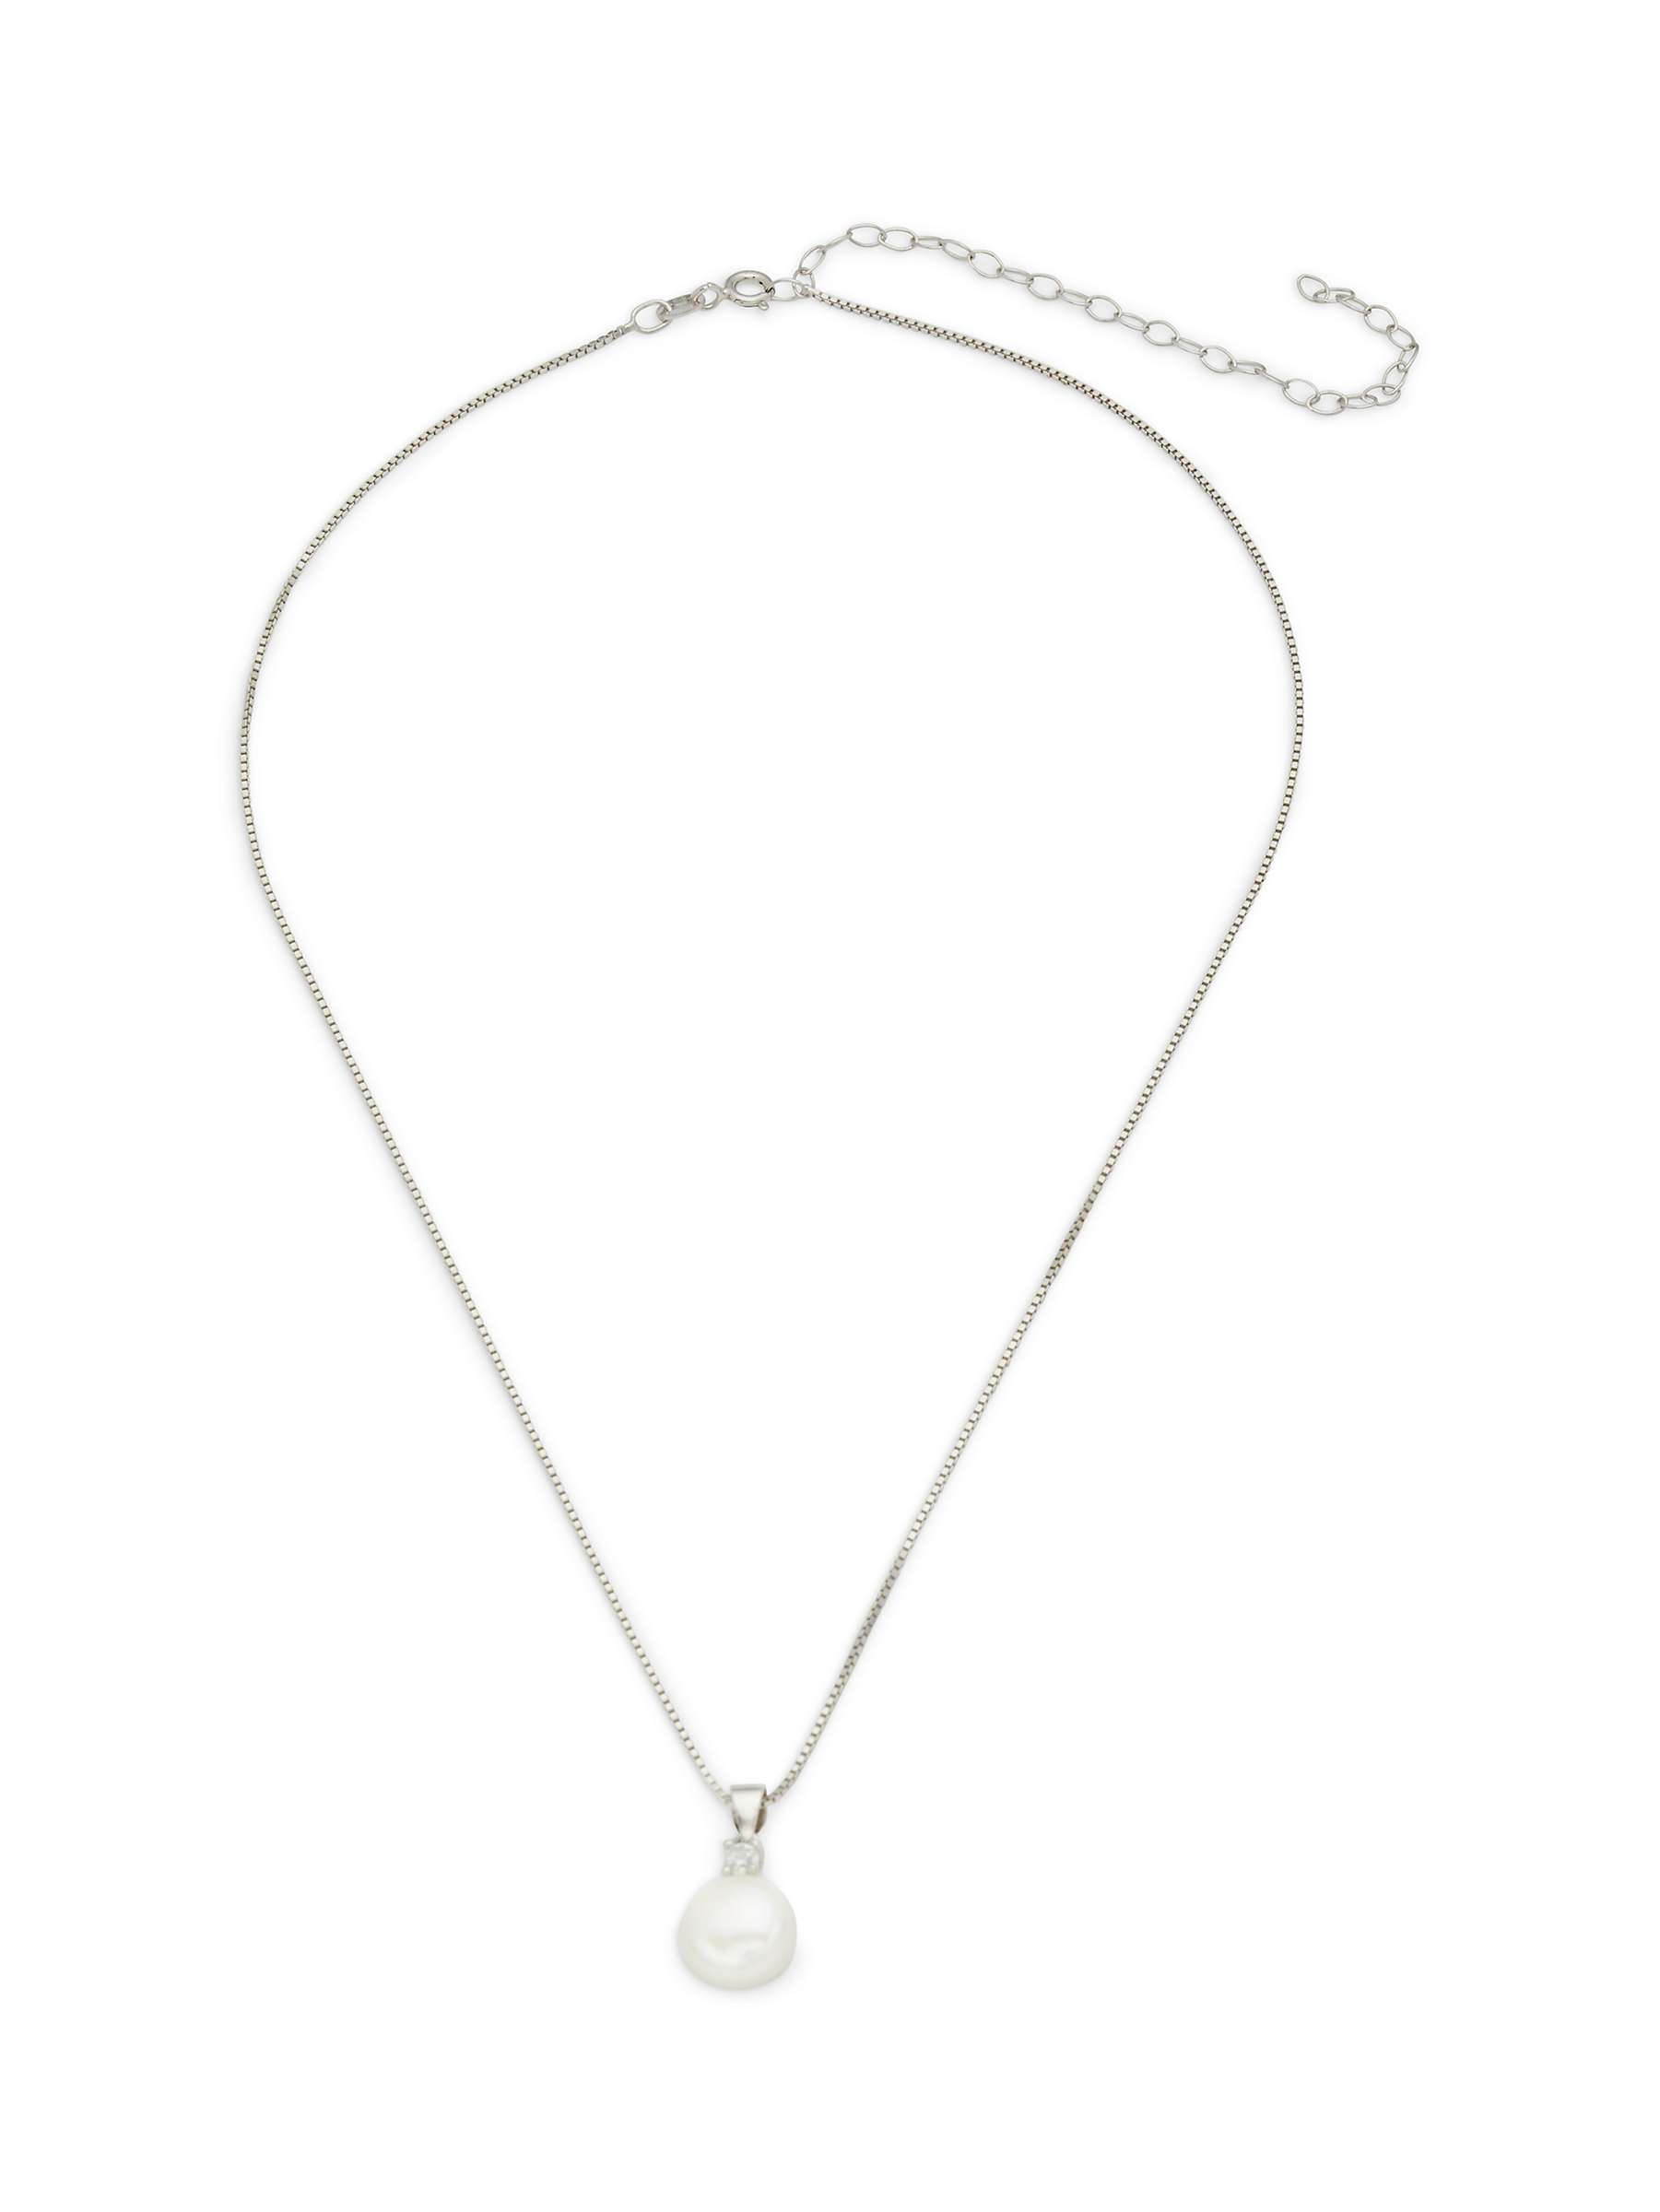 Buy Lido Large Button Pearl Small Cubic Zirconia Pendant Necklace, Silver/White Online at johnlewis.com